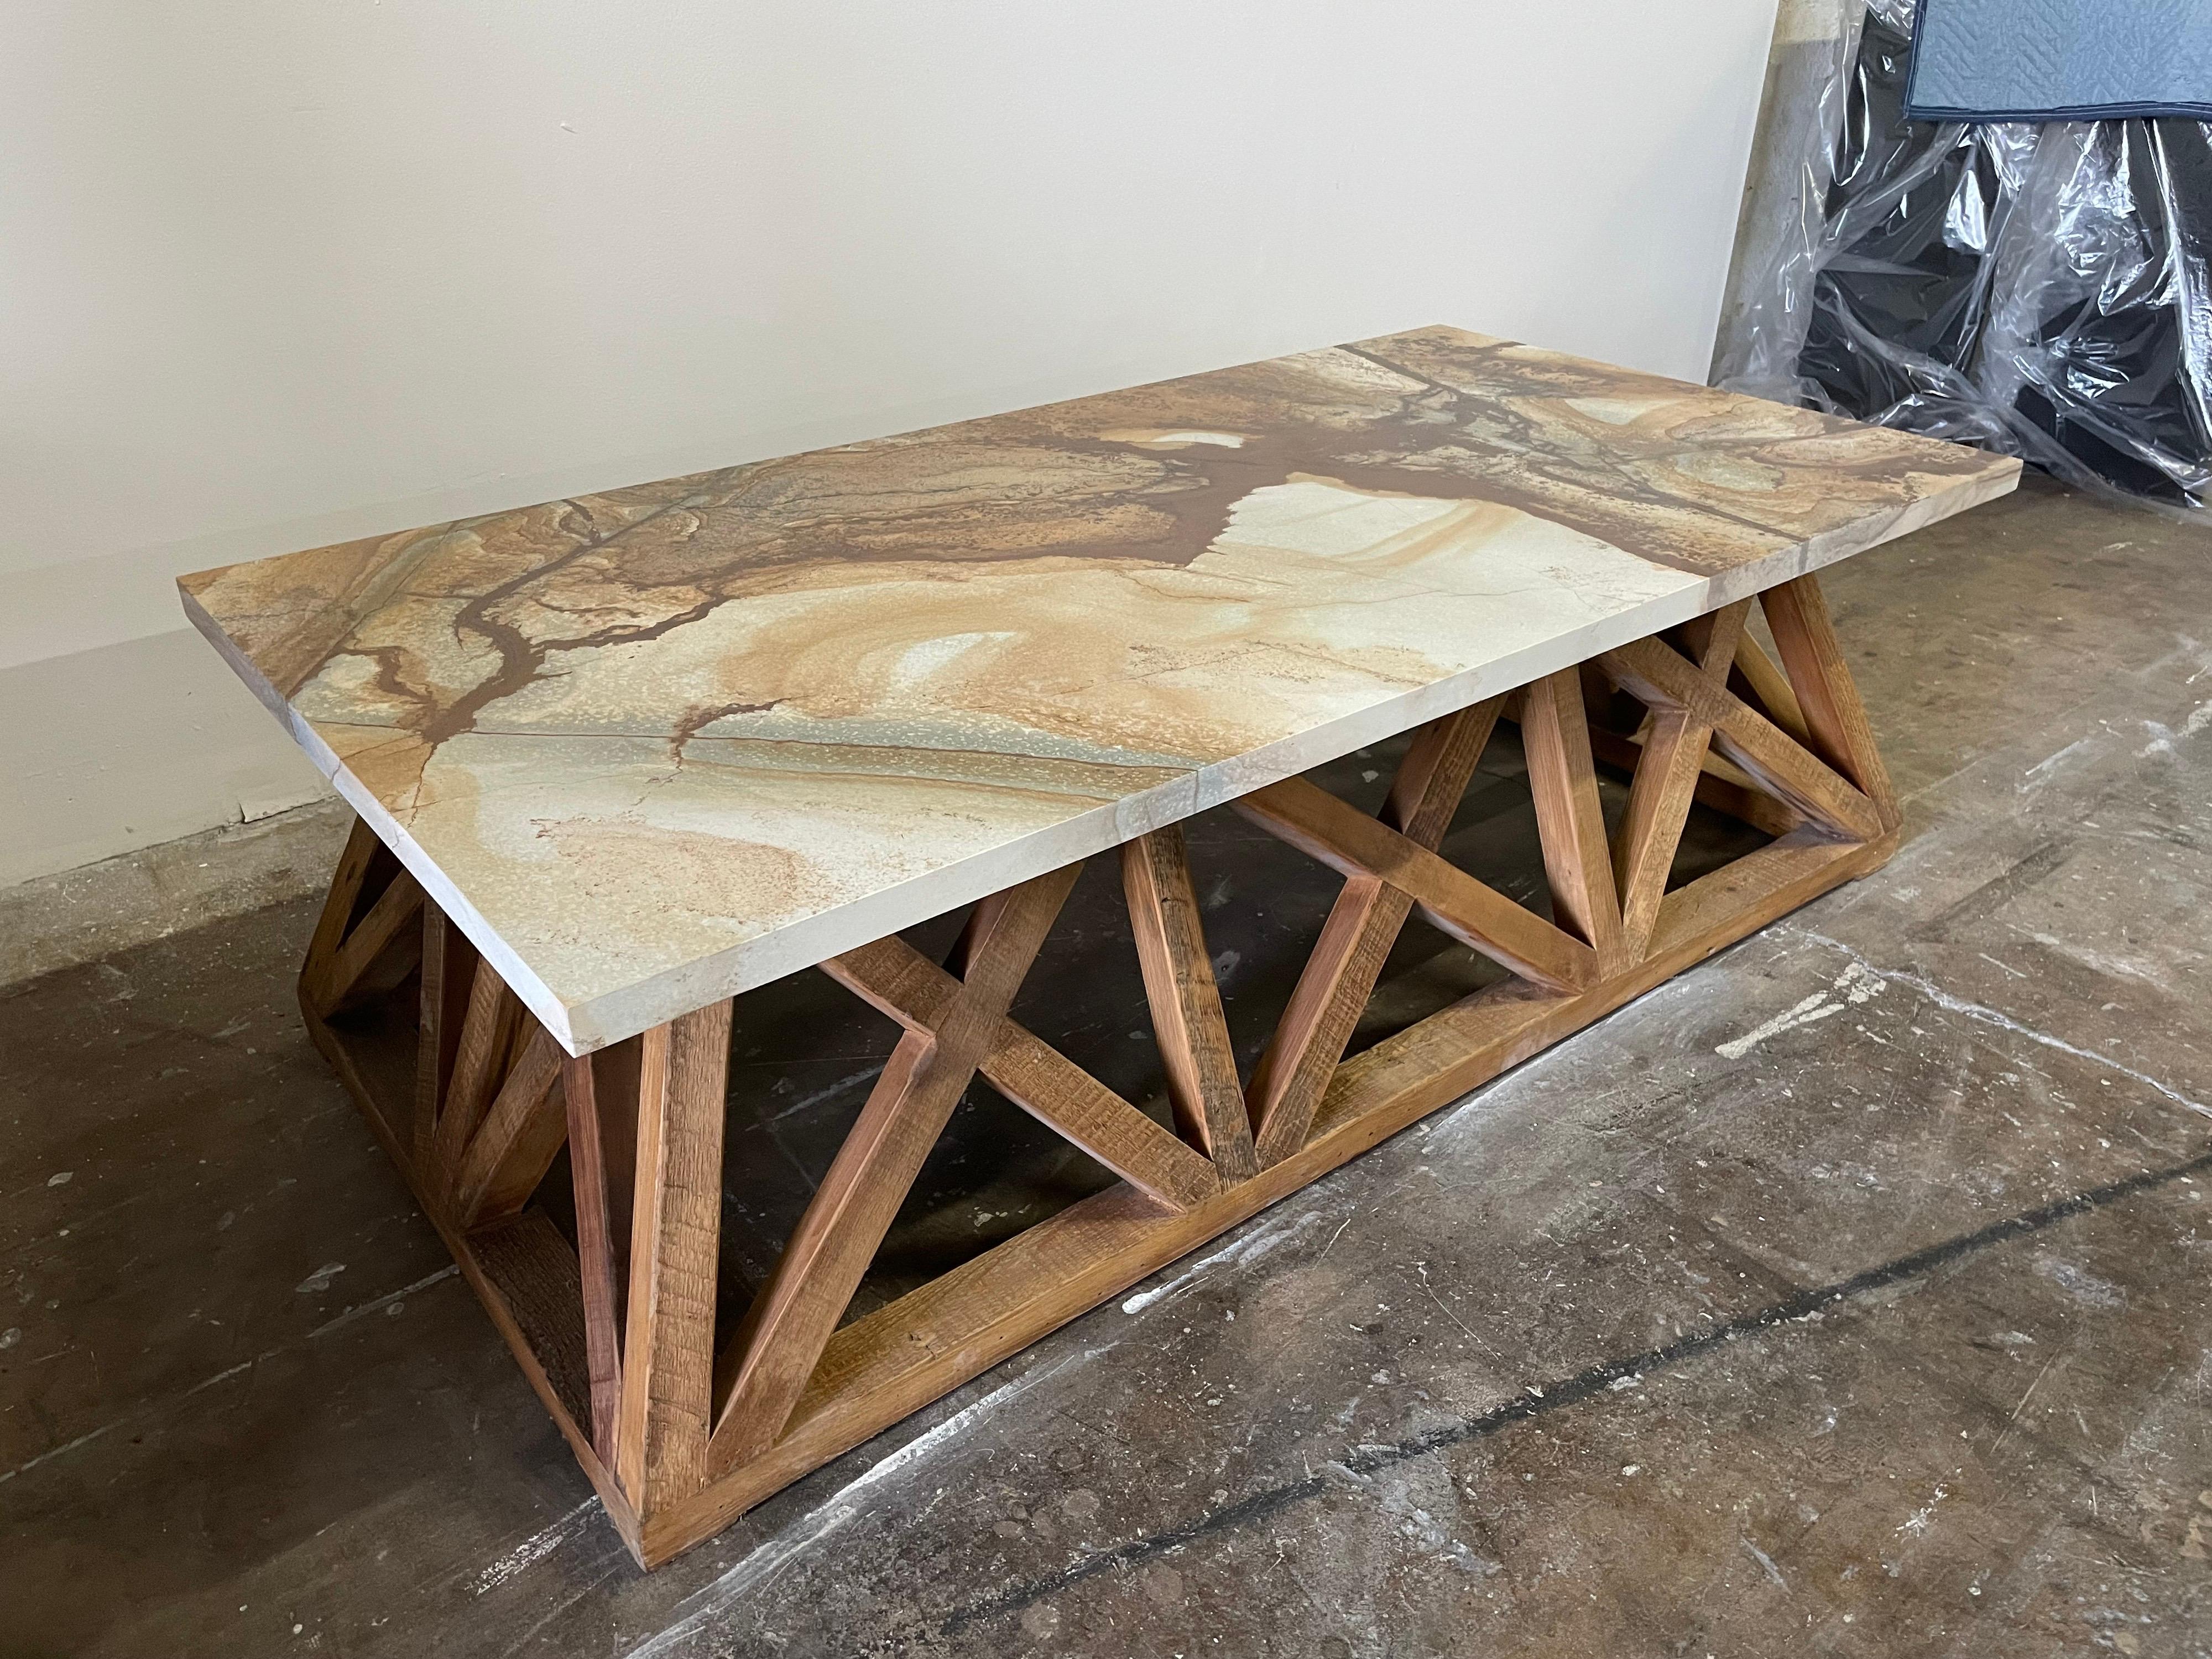 This is one of a pair available. Rustic and organic latticed base with flare out design. The siena marble top has beautiful neutral coloring and is perfect for any modern or beach decor! Wood is naturally varied in colors which work beautifully with